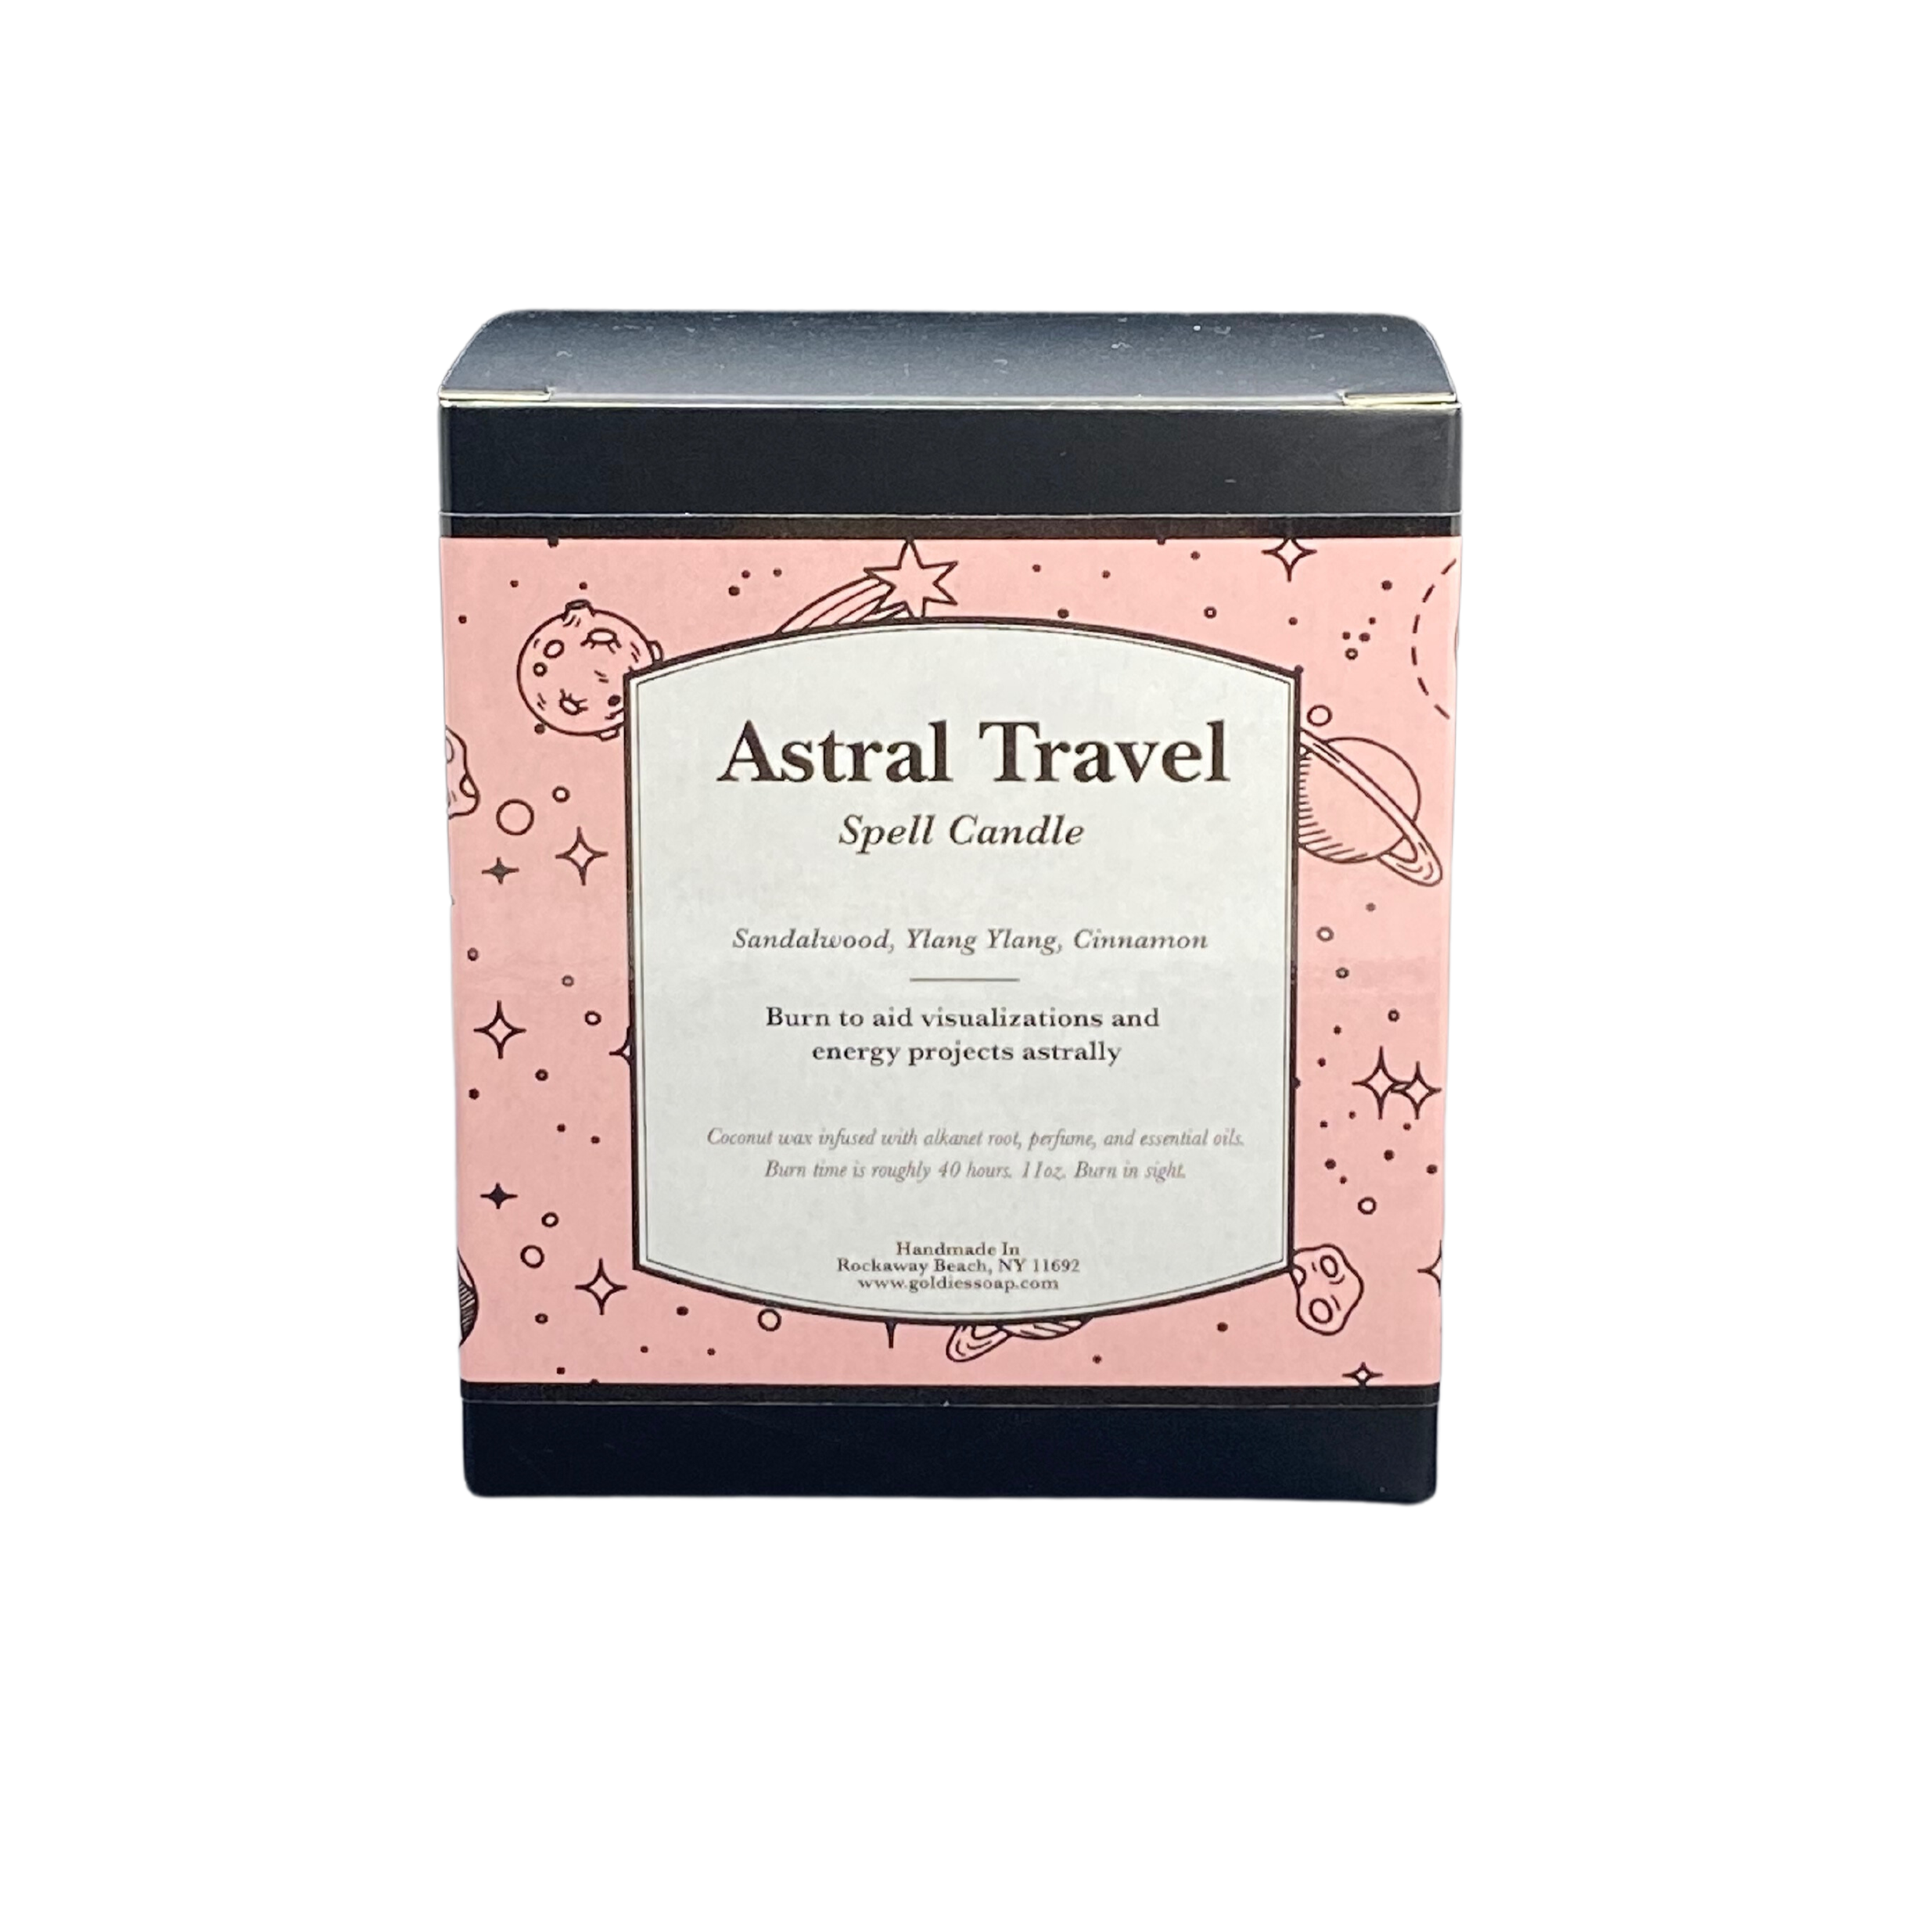 Astral Travel Spell Candle